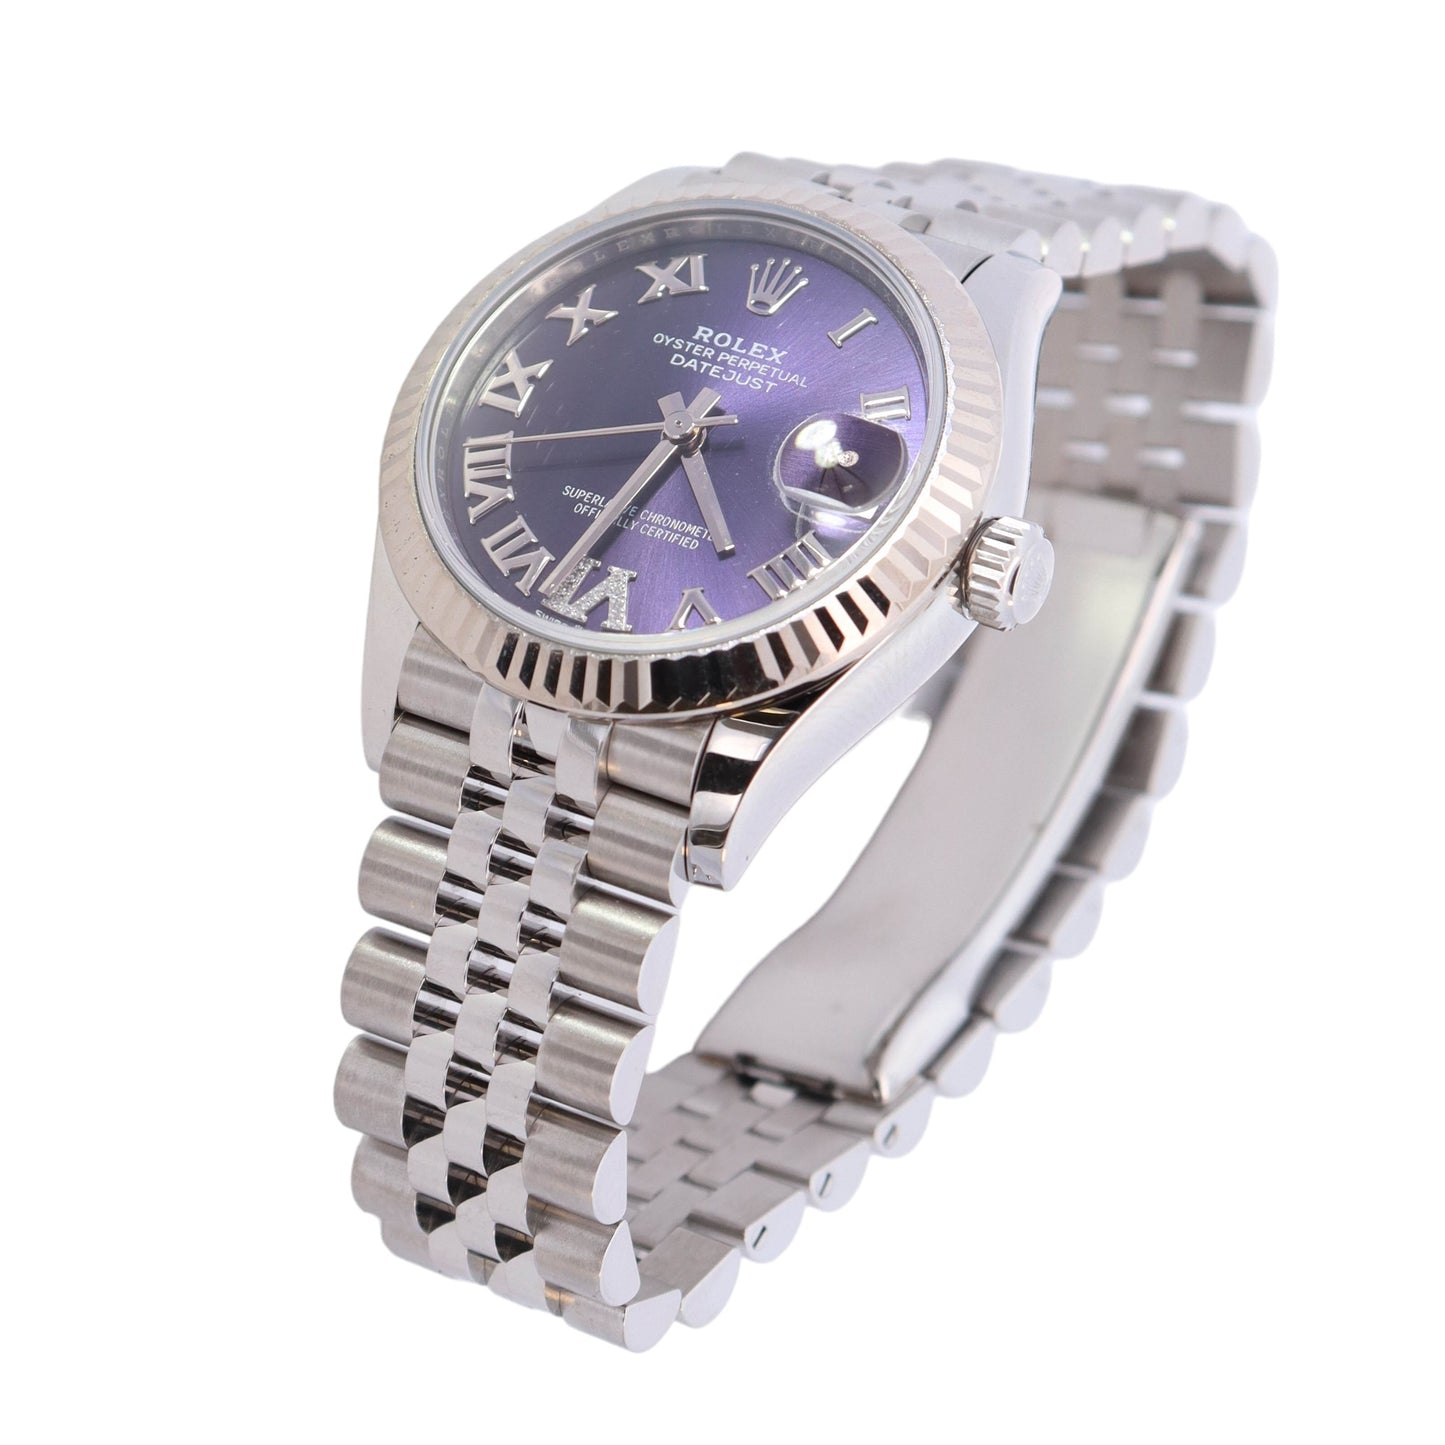 Rolex Datejust Stainless Steel 31mm Purple Roman Dial Watch Reference #: 278274